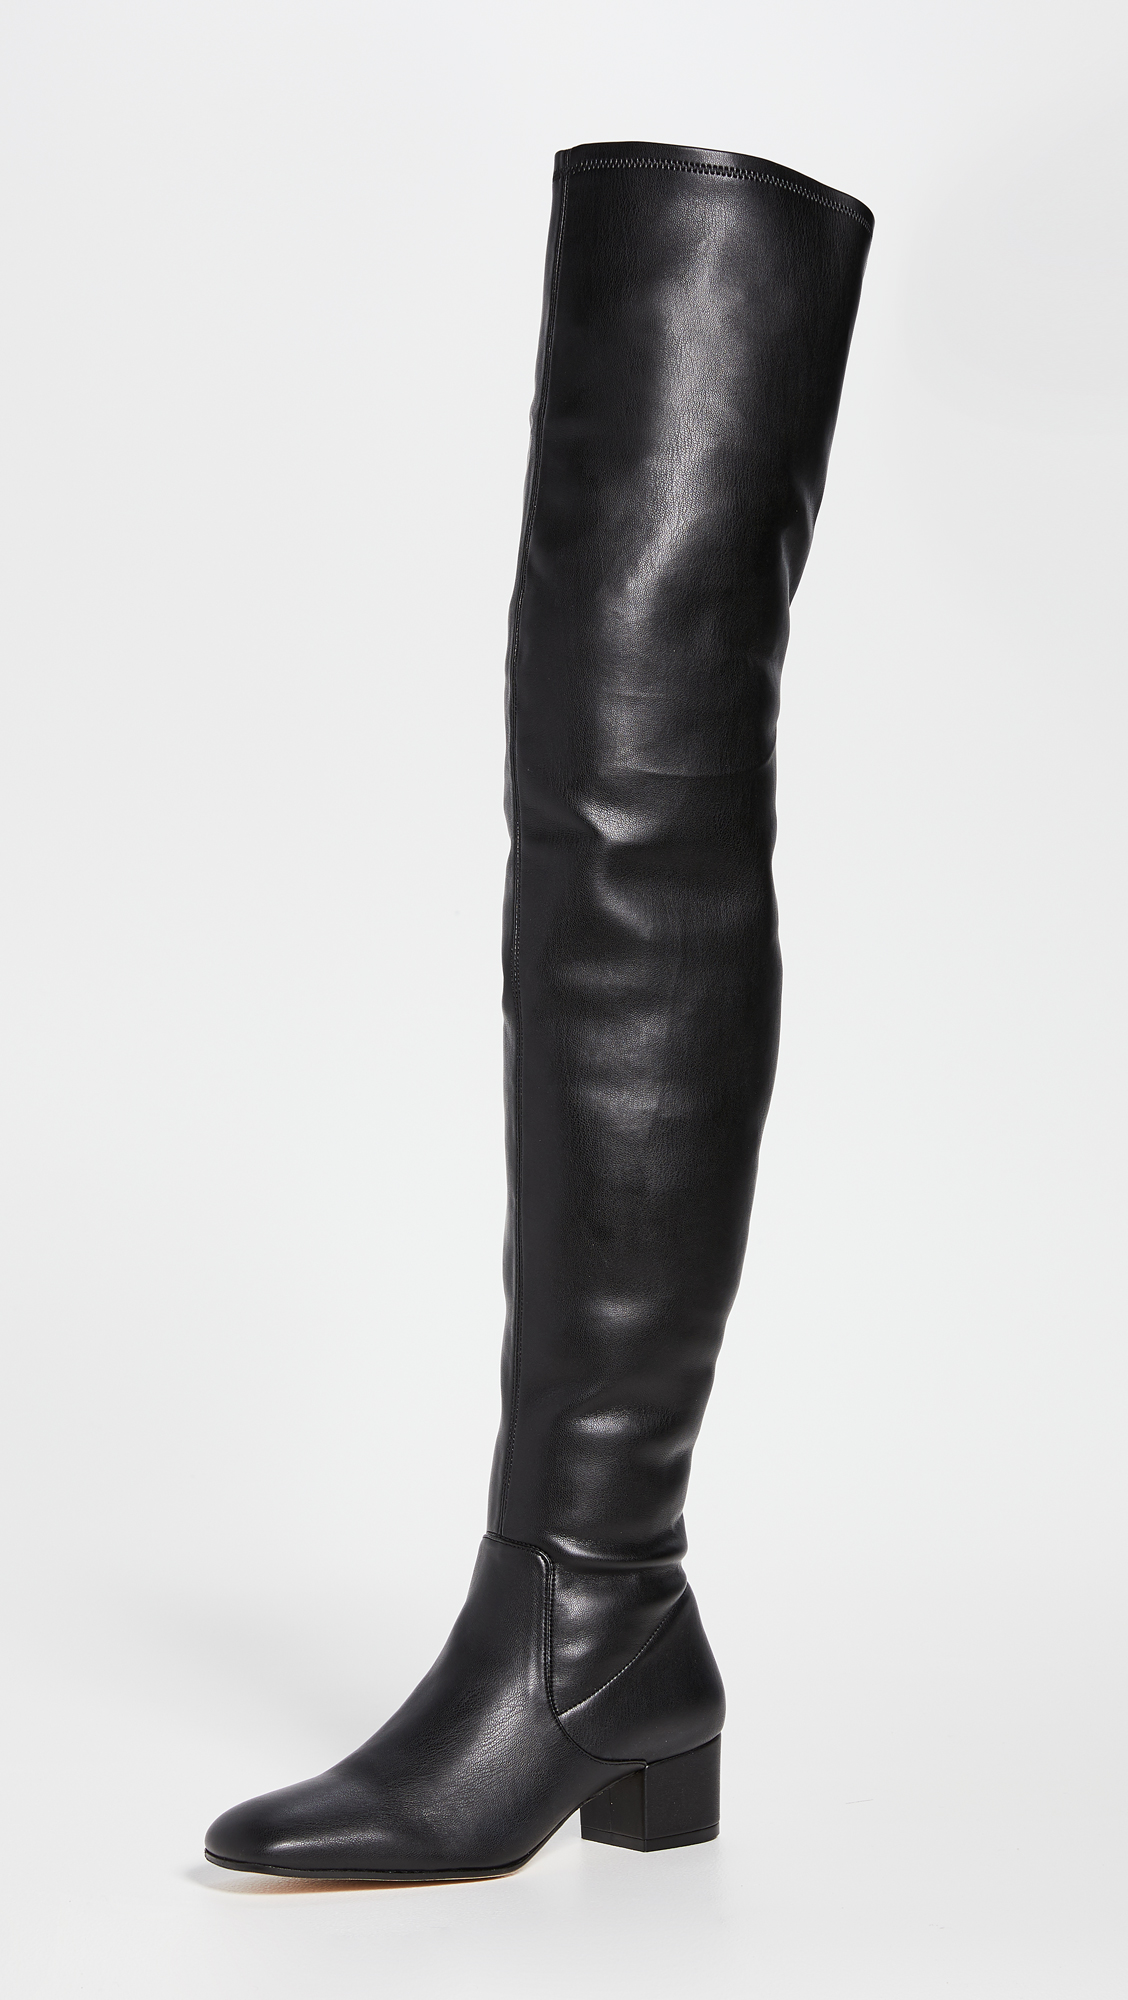 The 25 Best Thigh-High Boots to Buy This Fall | Who What Wear